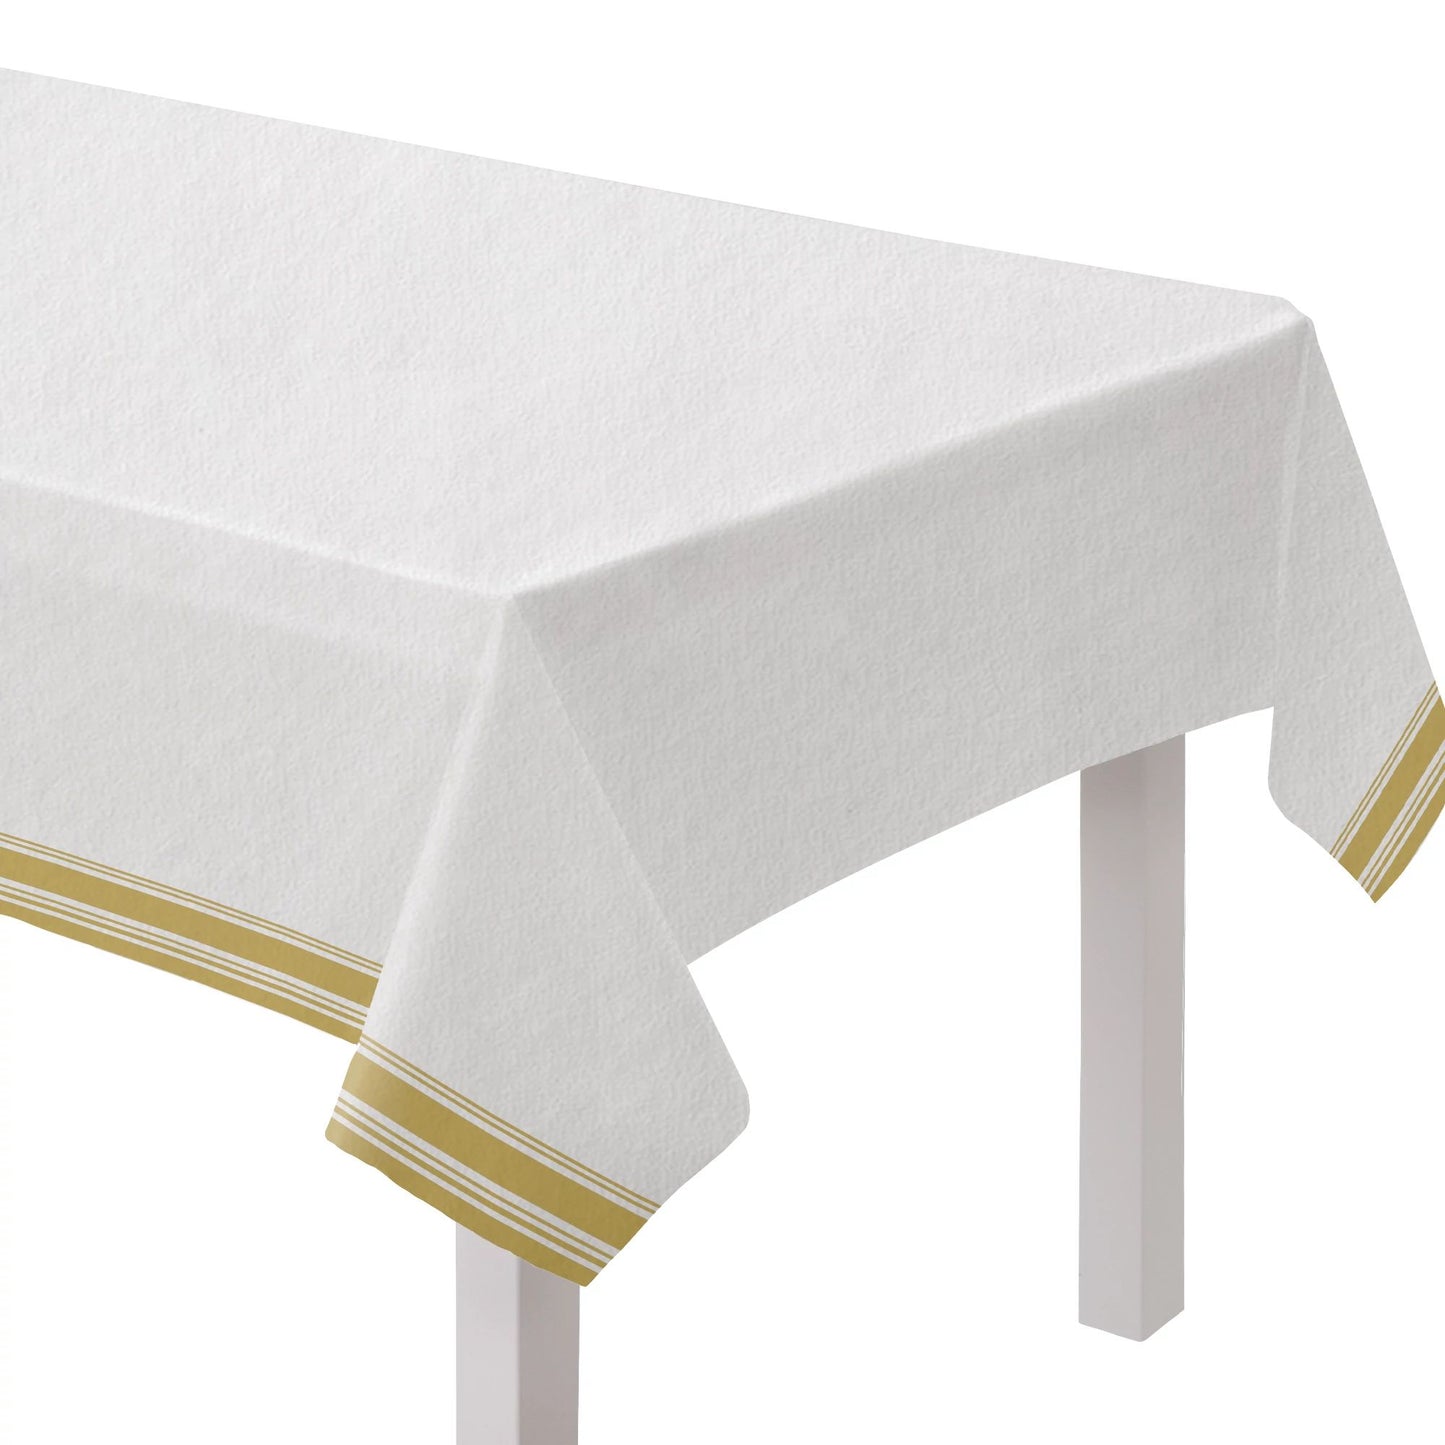 WHITE & GOLD TABLE COVER